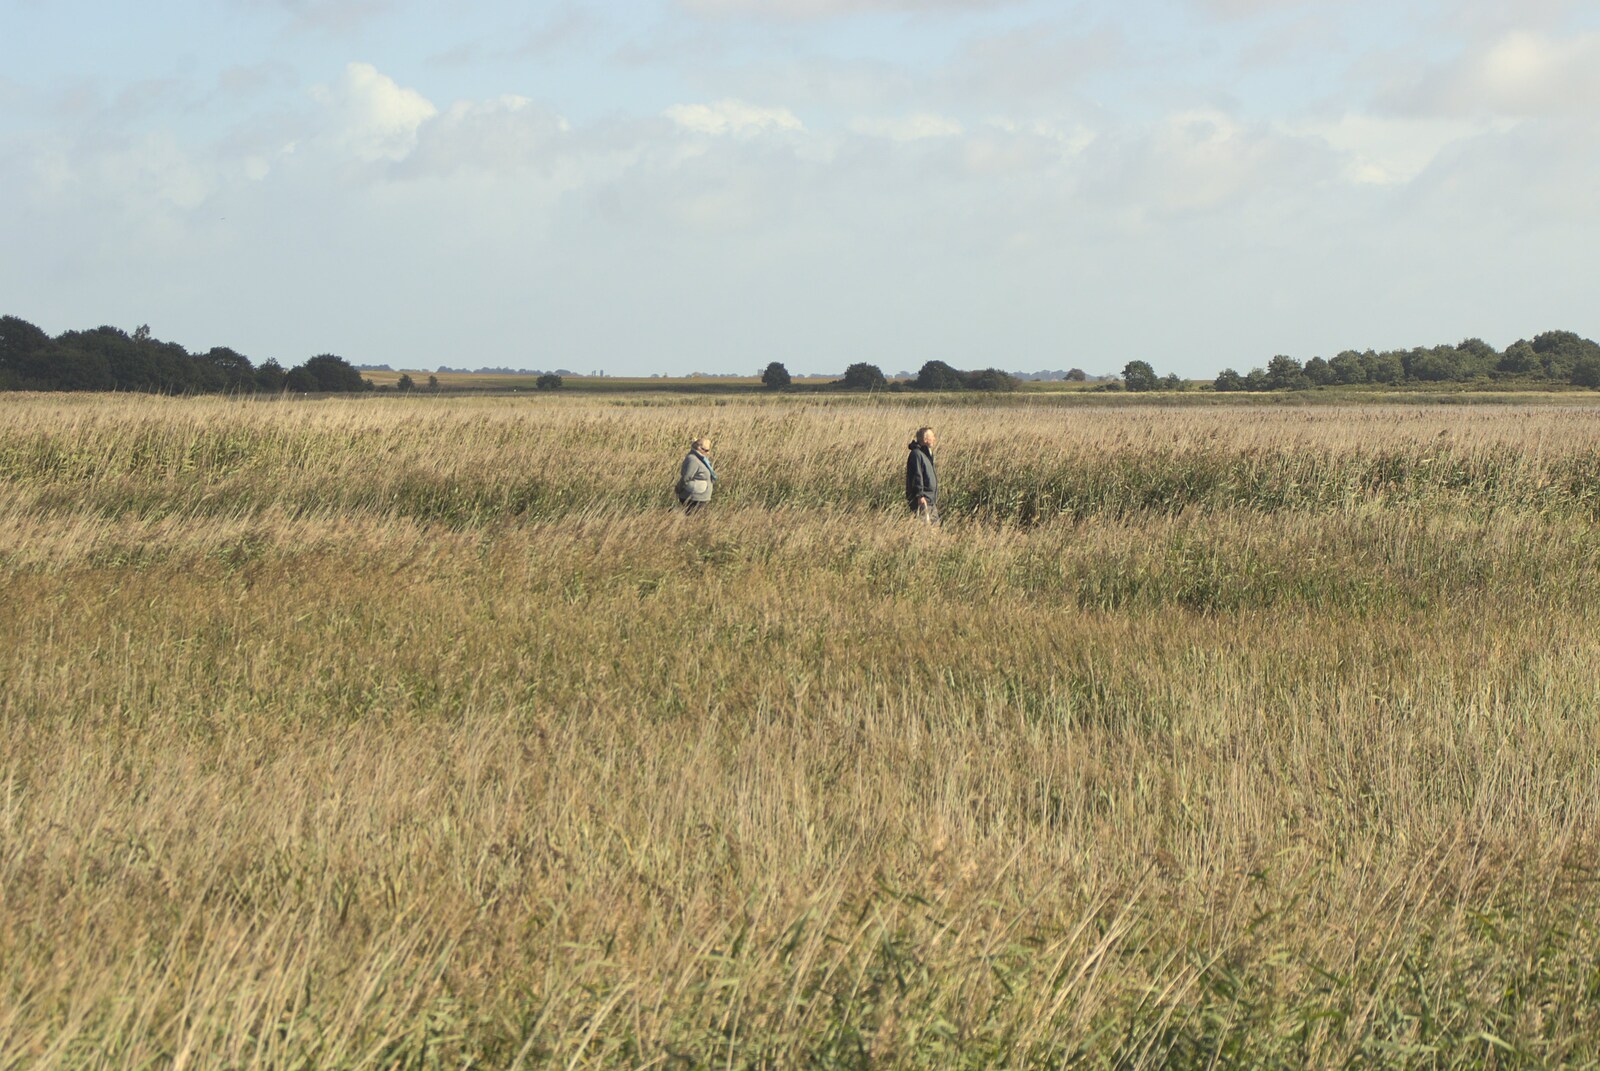 The Aldeburgh Food Festival, Snape Maltings, Suffolk - 25th September 2010: People roam about in the reeds